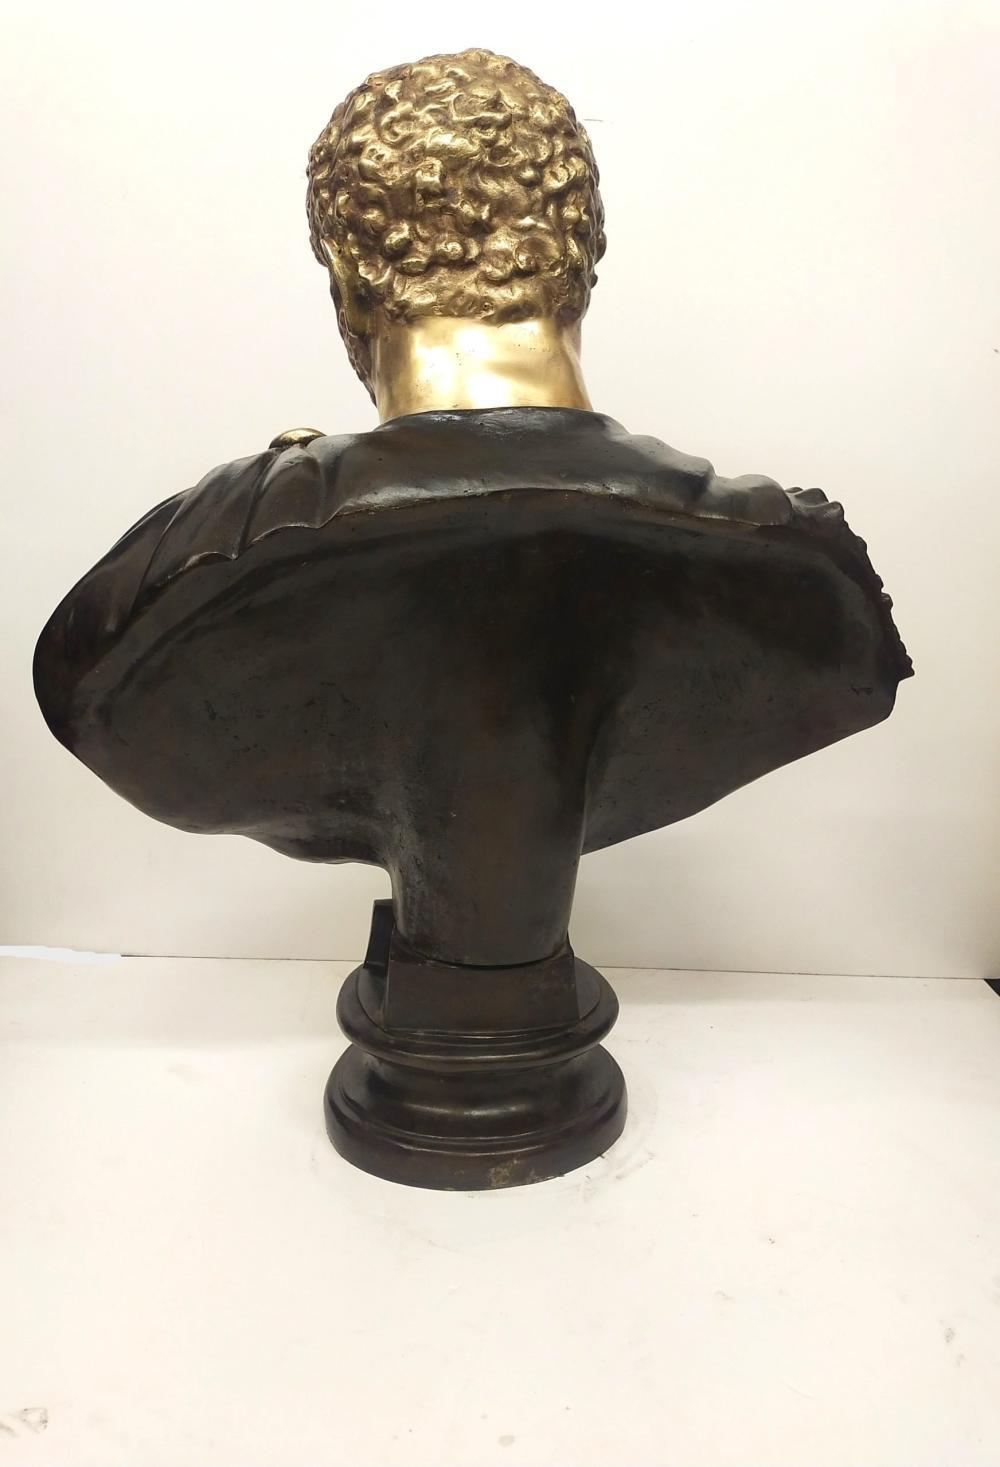 Bust of Emperor Caracalla in gilded bronze, ADDITIONAL PHOTOS, INFORMATION OF THE LOT AND SHIPPING INFORMATION CAN BE REQUEST BY SENDING AN EMAIL. Busto di imperatore Caracalla in bronzo dorato

Dimensions
76x59x30 cm
Good condition - used with